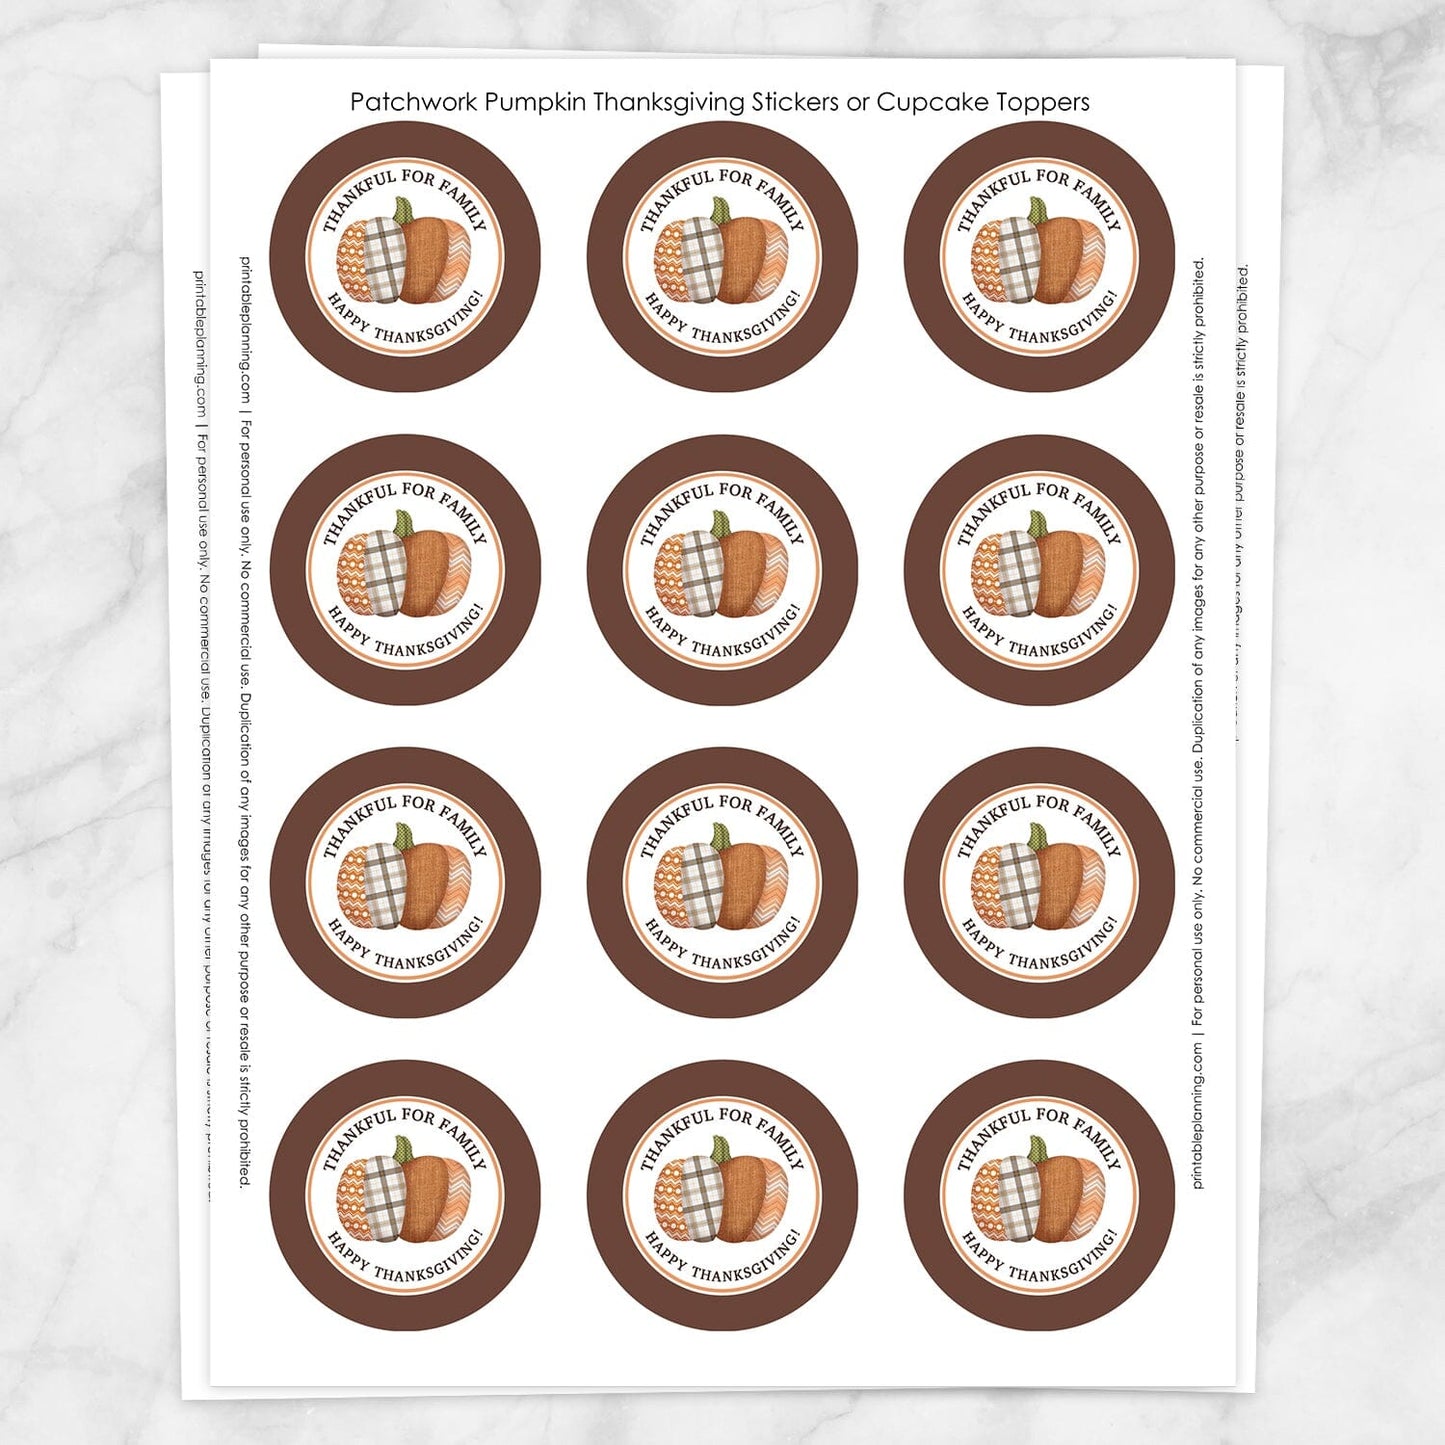 Printable Patchwork Pumpkin Thanksgiving Stickers or Cupcake Toppers at Printable Planning. Sheet of 12.